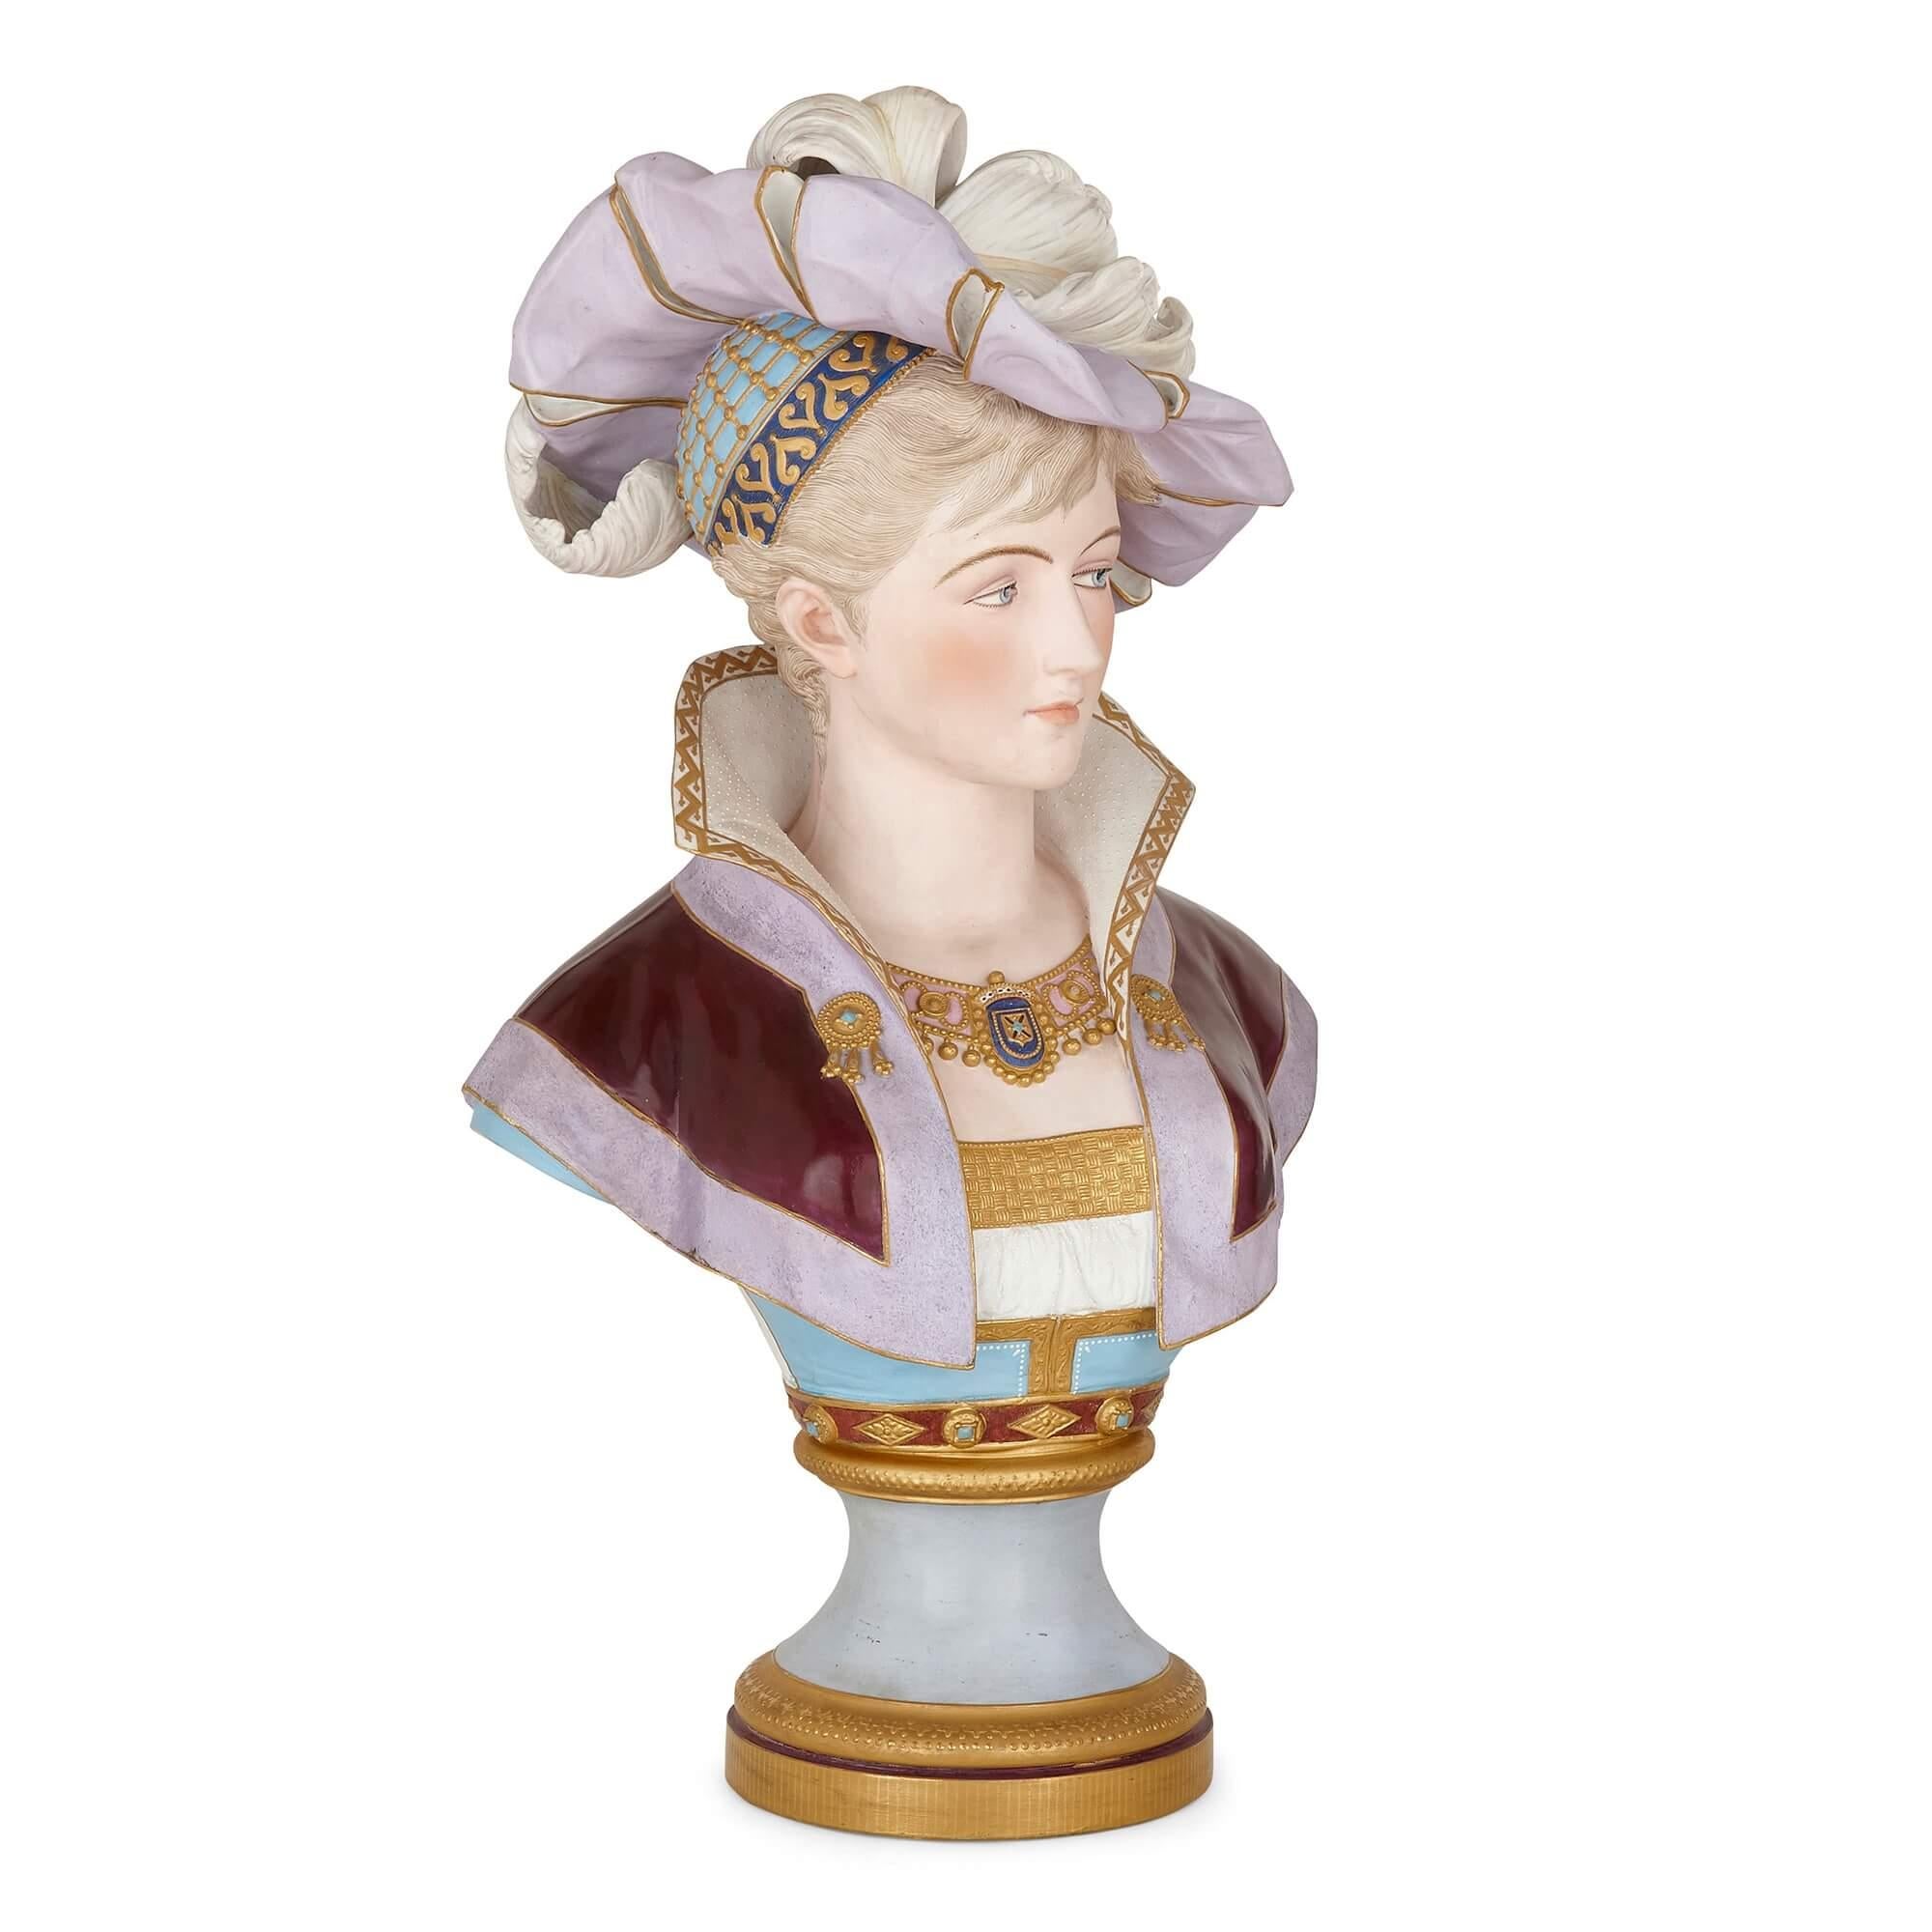 French painted bisque porcelain bust of a woman
French, 19th century
Measures: Height 68cm, width 40cm, depth 30cm

This fine bust is crafted from painted bisque porcelain. The bust depicts a young woman in a historicised Renaissance style: the